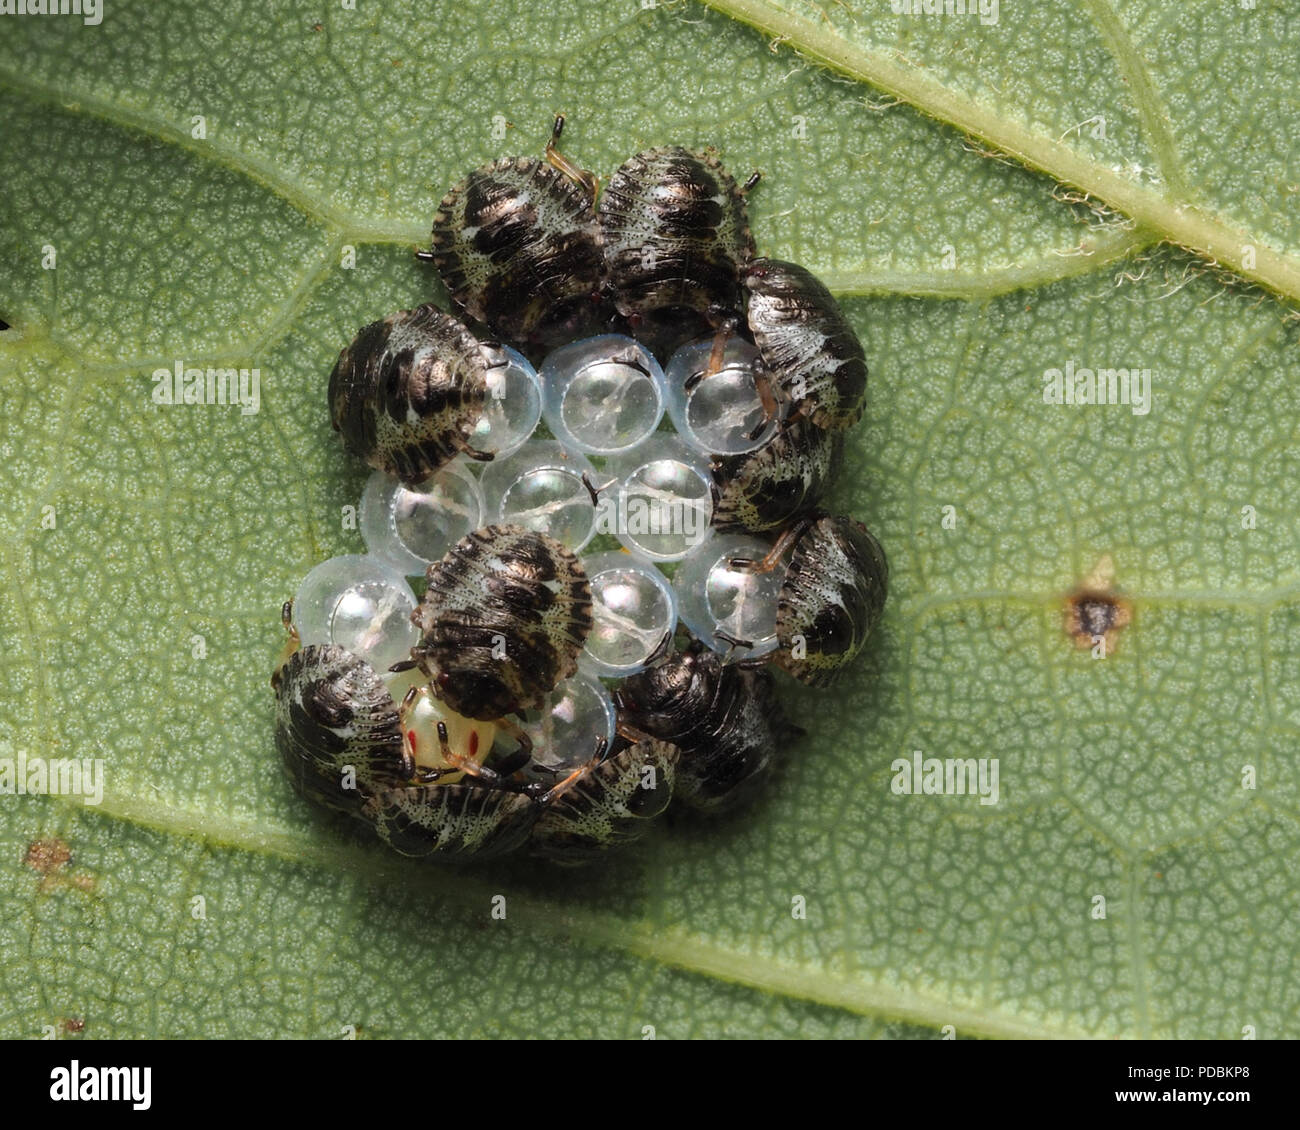 Newly hatched forest Shieldbug nymphs (Pentatoma rufipes) on underside of sycamore leaf with one unhatched egg. Tipperary, Ireland Stock Photo